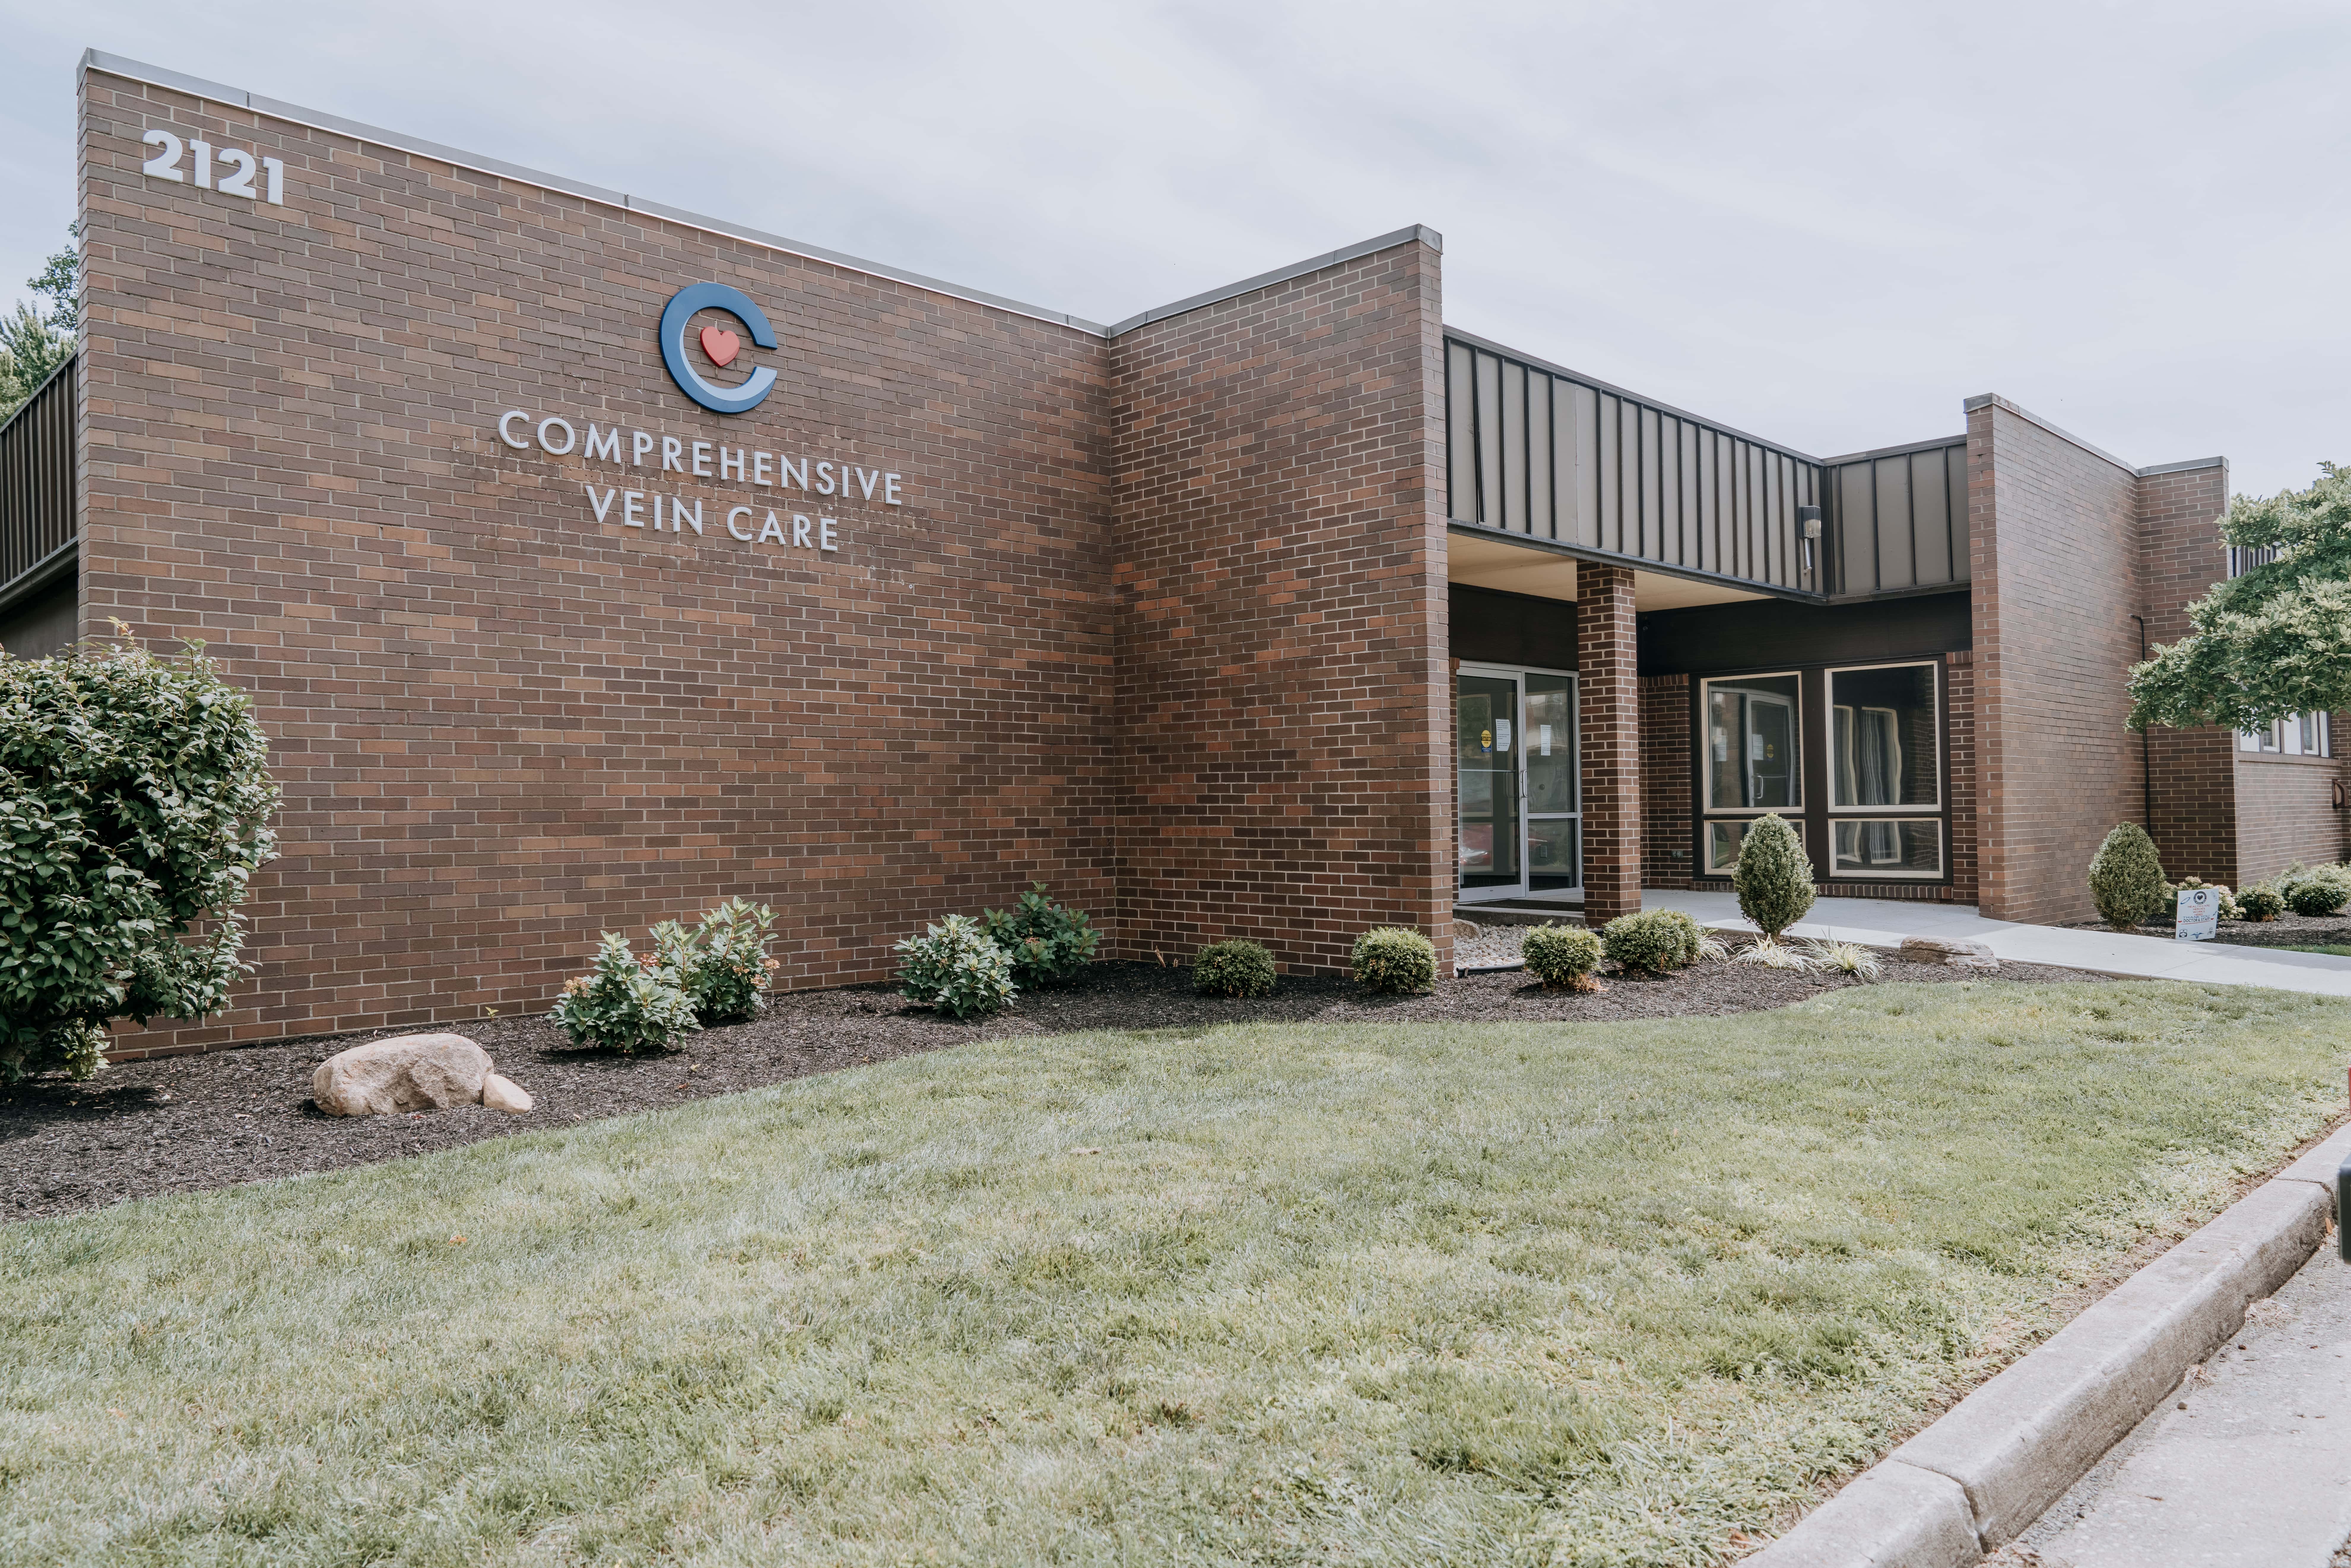 Comprehensive Vein Care - Springfield, OH, US, center for veins